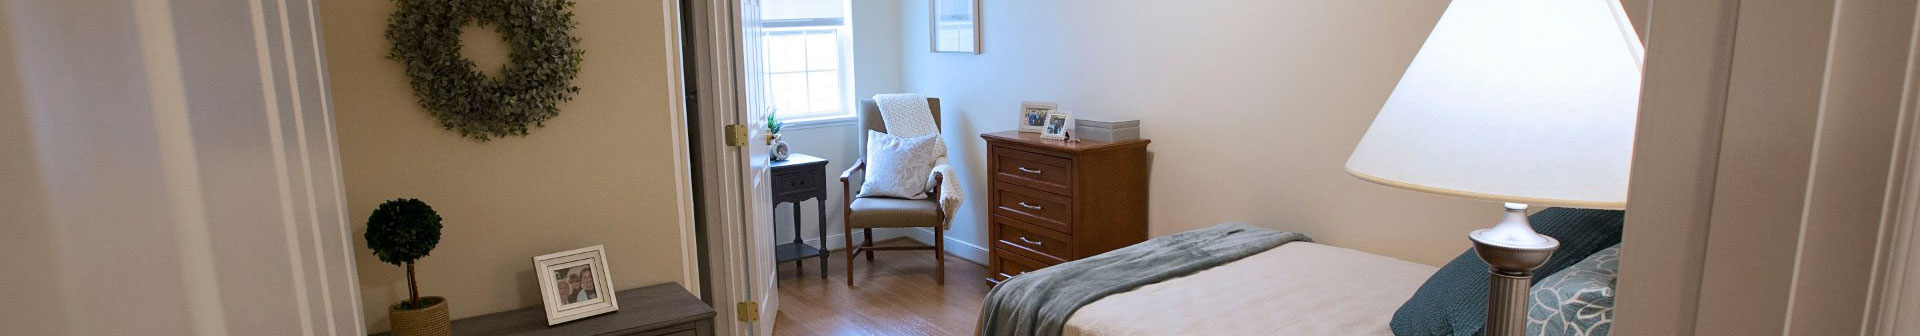 Senior living residence bedroom with walk in closet